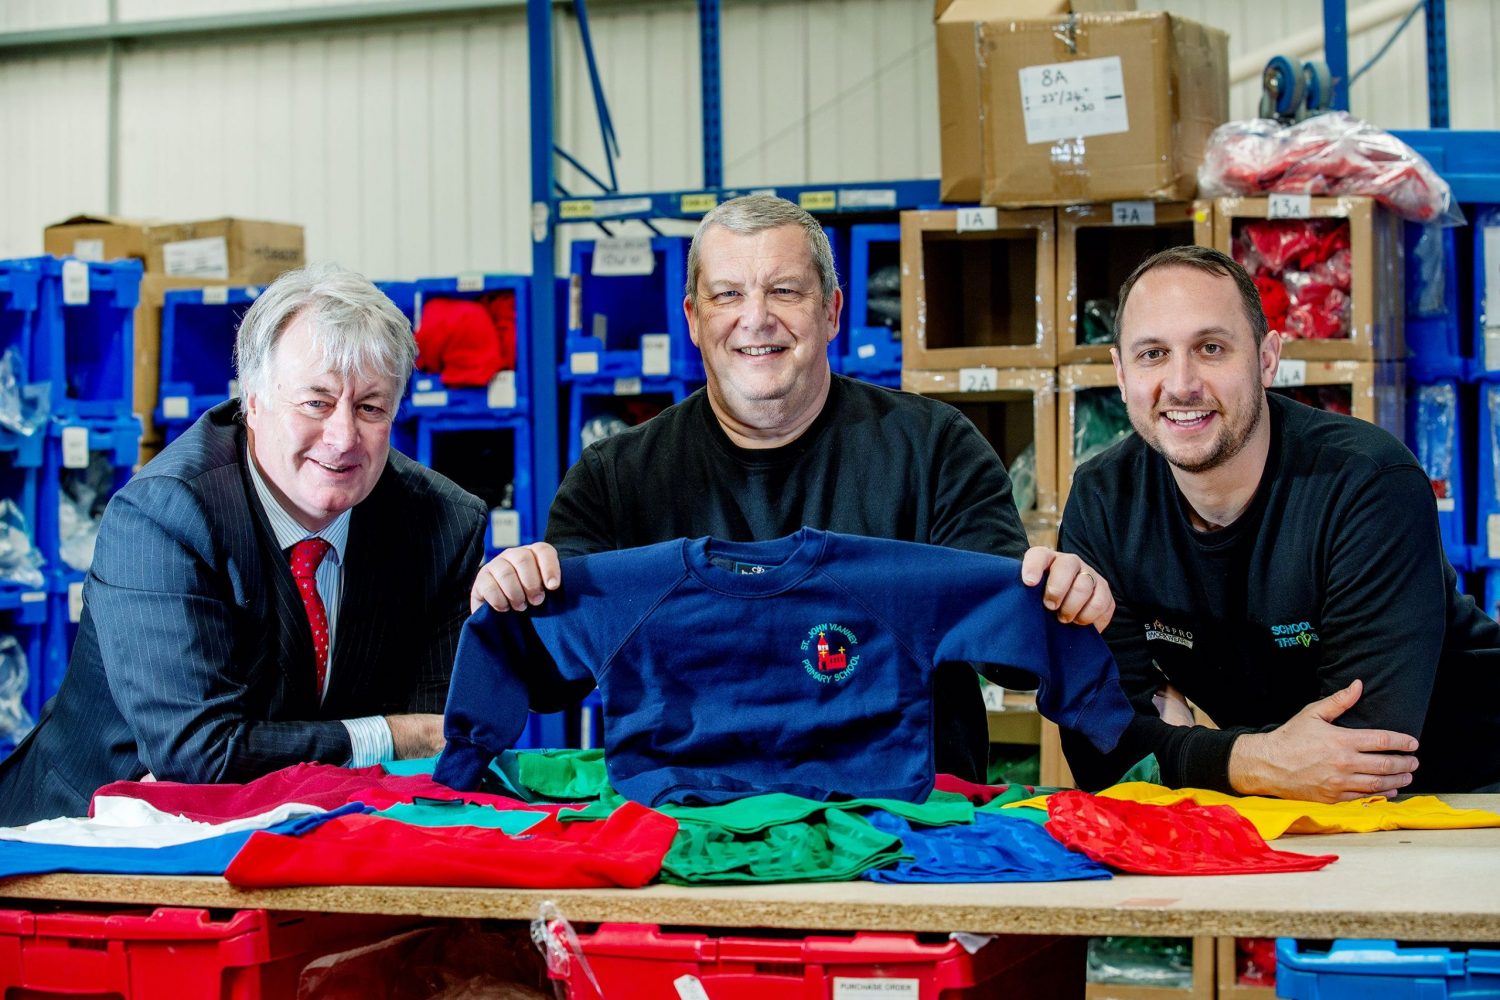 Three men in a clothing factory, man in the middle holding up a blue sweat shirt with a red logo, bearded man to the right hand side wearing a blue sweat shirt and man at the left hand end wearing a blue suit with a red tie has grey hair.